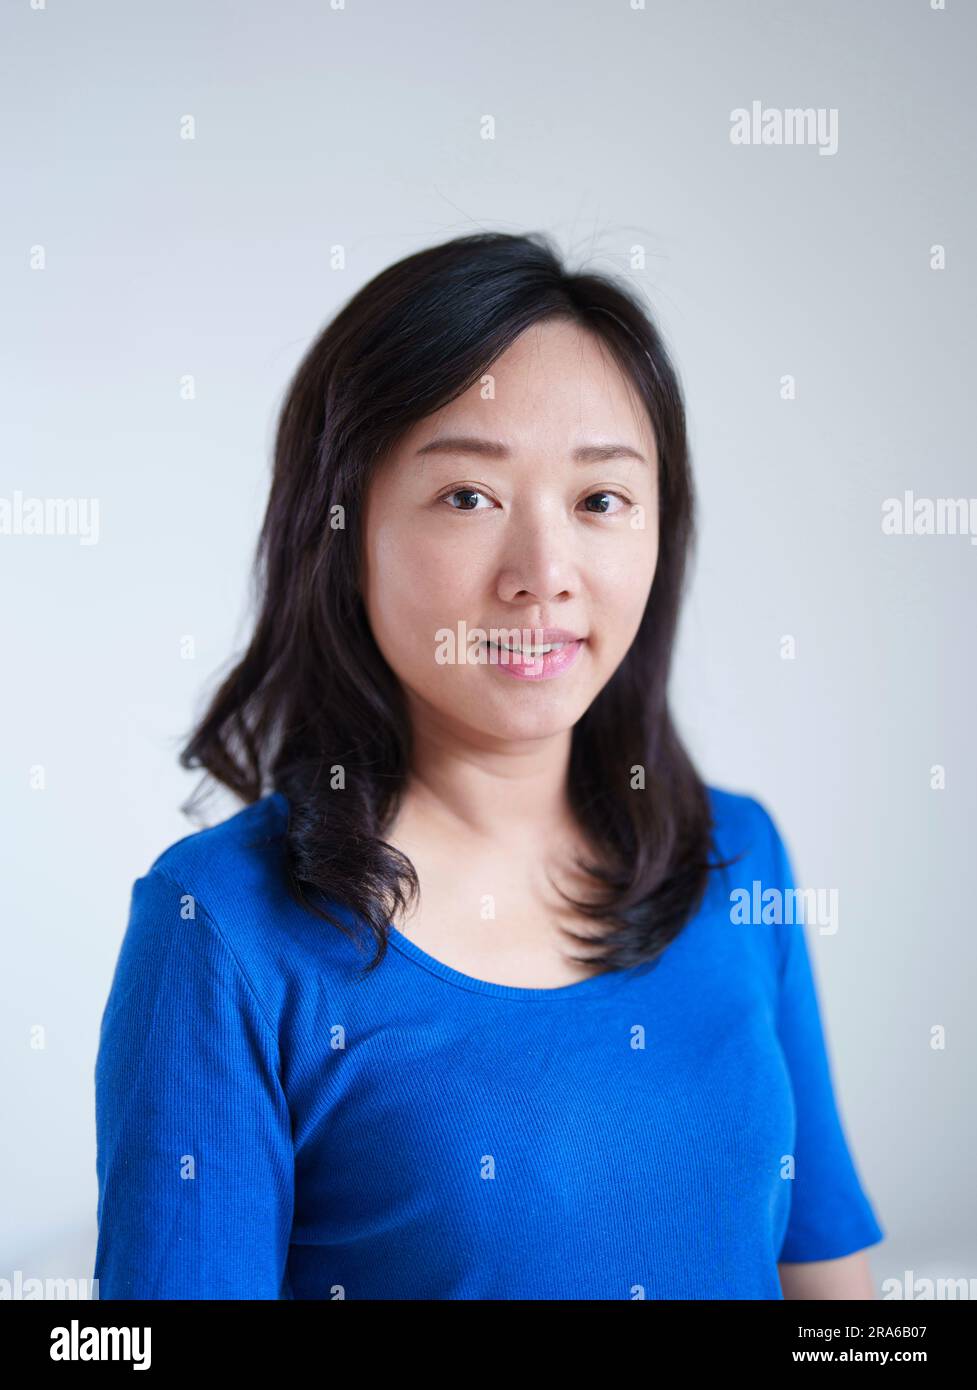 Portrait of an Asian woman wearing a blue top Stock Photo